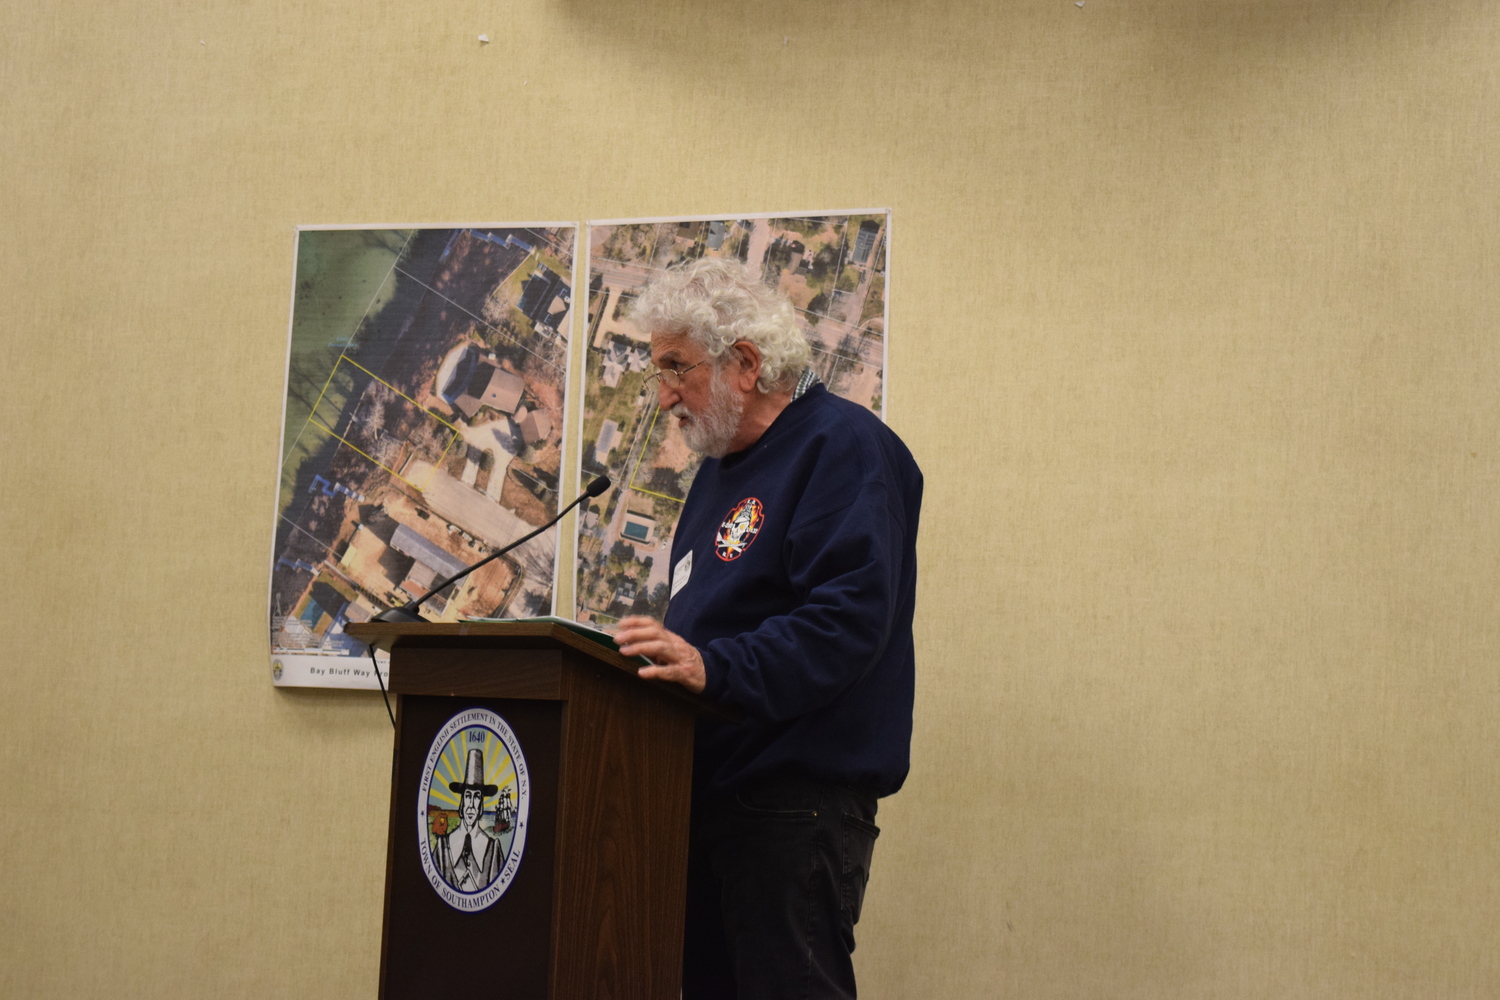 Ray D'Angelo thanked the town board for moving toward making the former Bel Air Cove Motel property a park. CHRISTOPHER WALSH